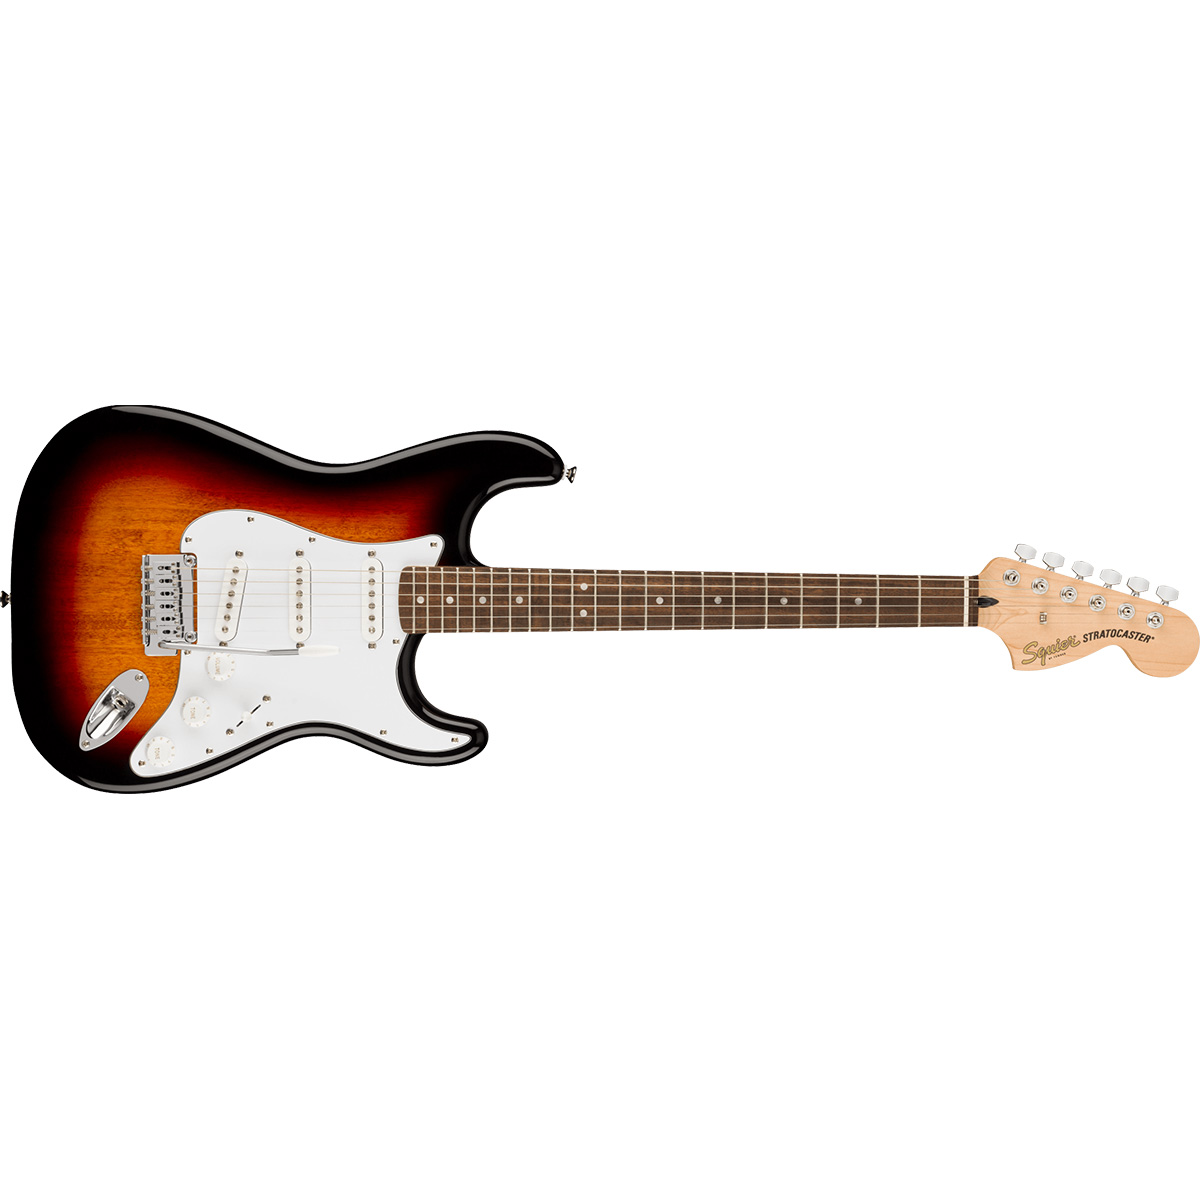 Squier by Fender Affinity Series Stratocaster LRL WPG 3TS エレキ